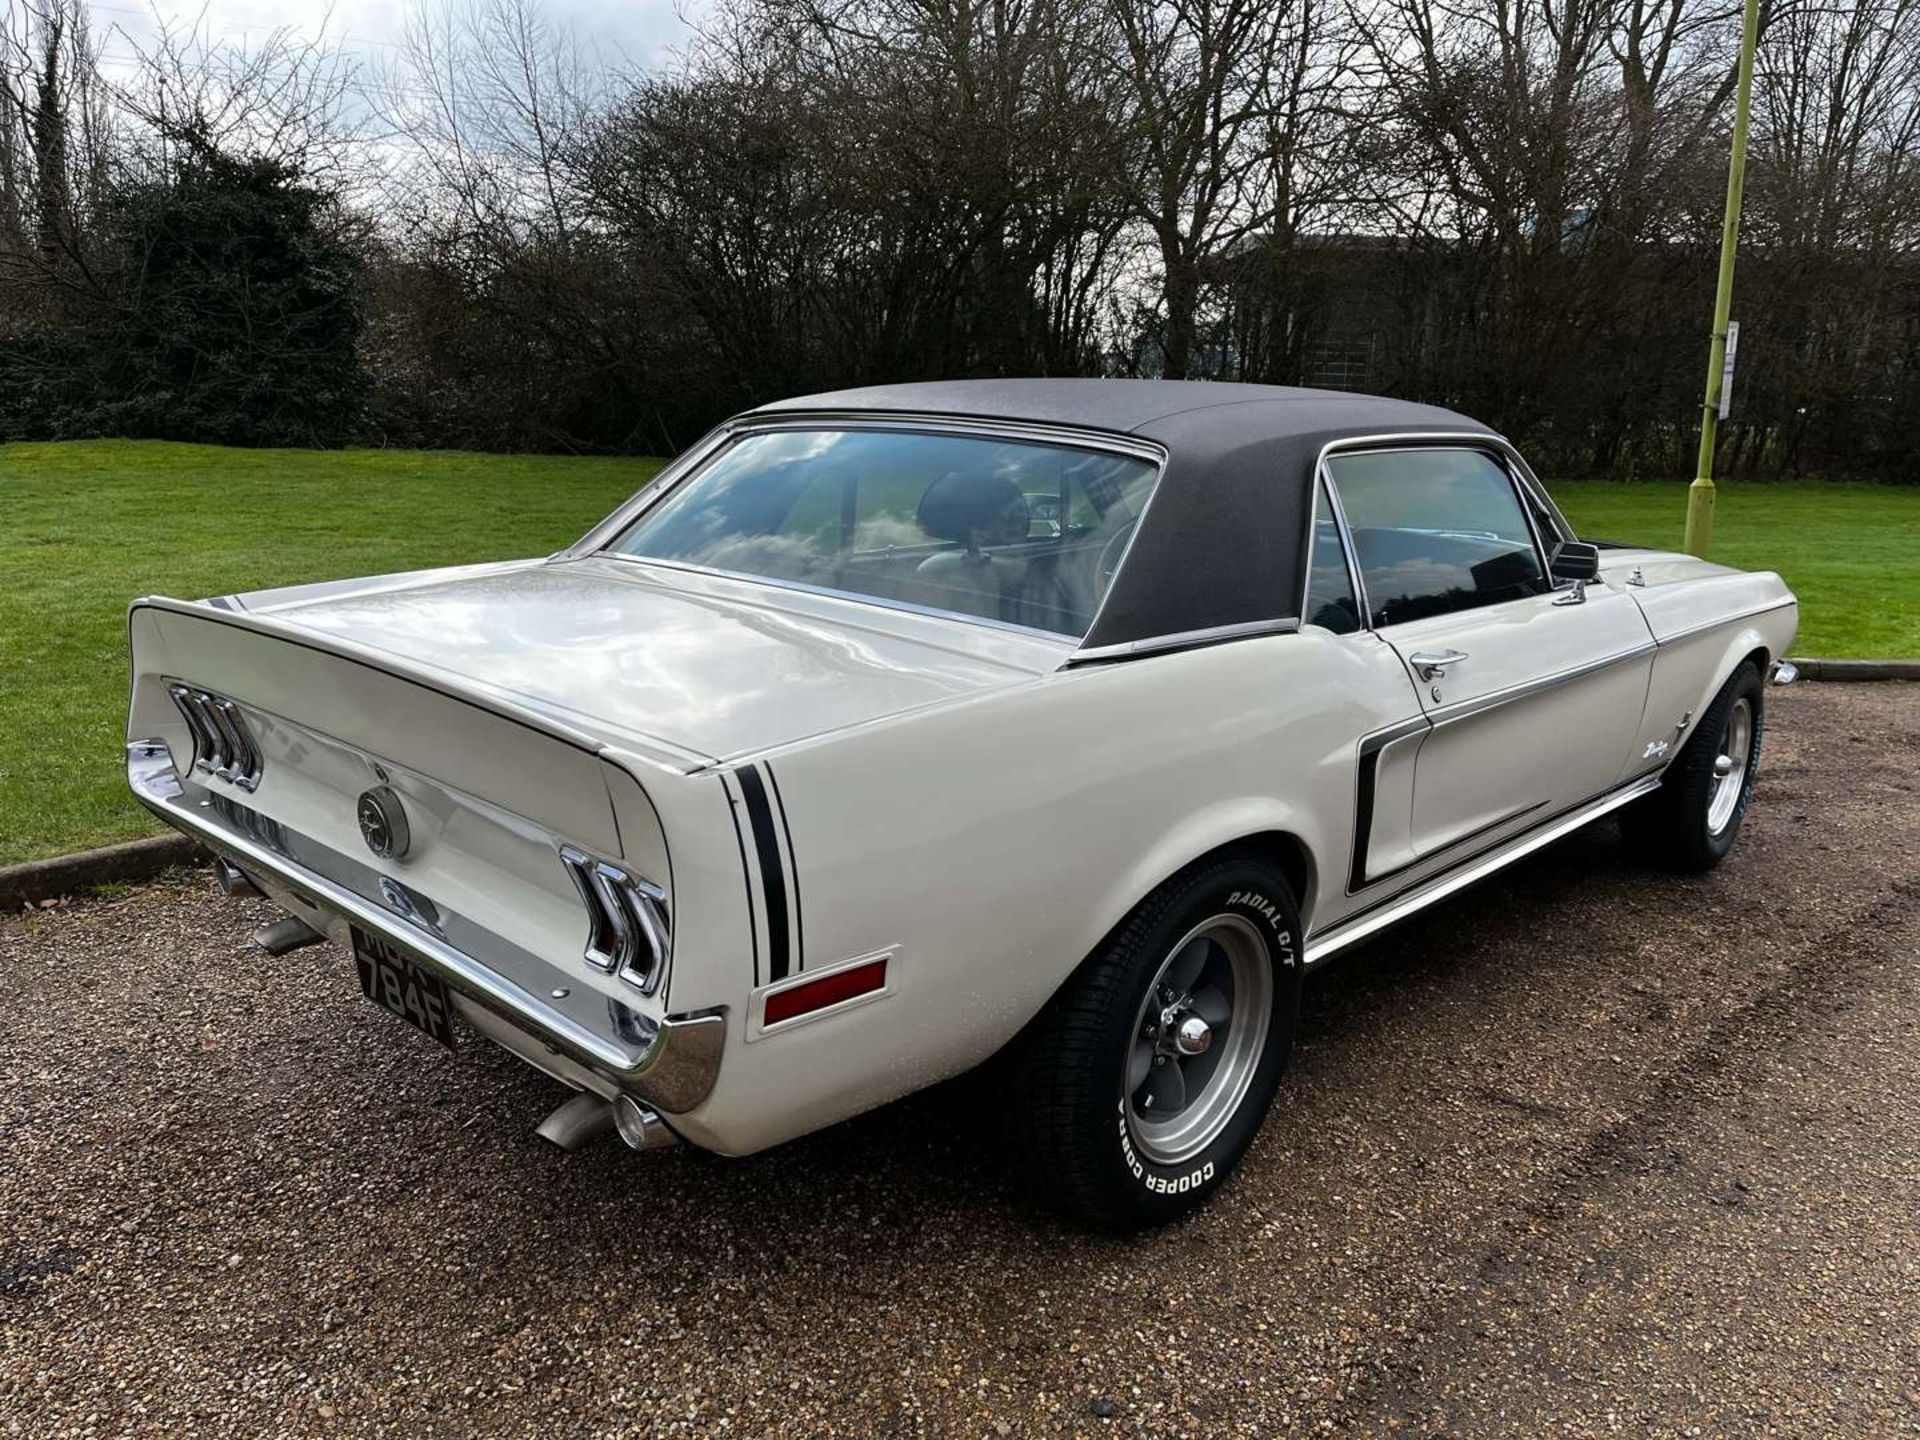 1968 FORD MUSTANG 5.0 V8 AUTO COUPE LHD - Image 7 of 29